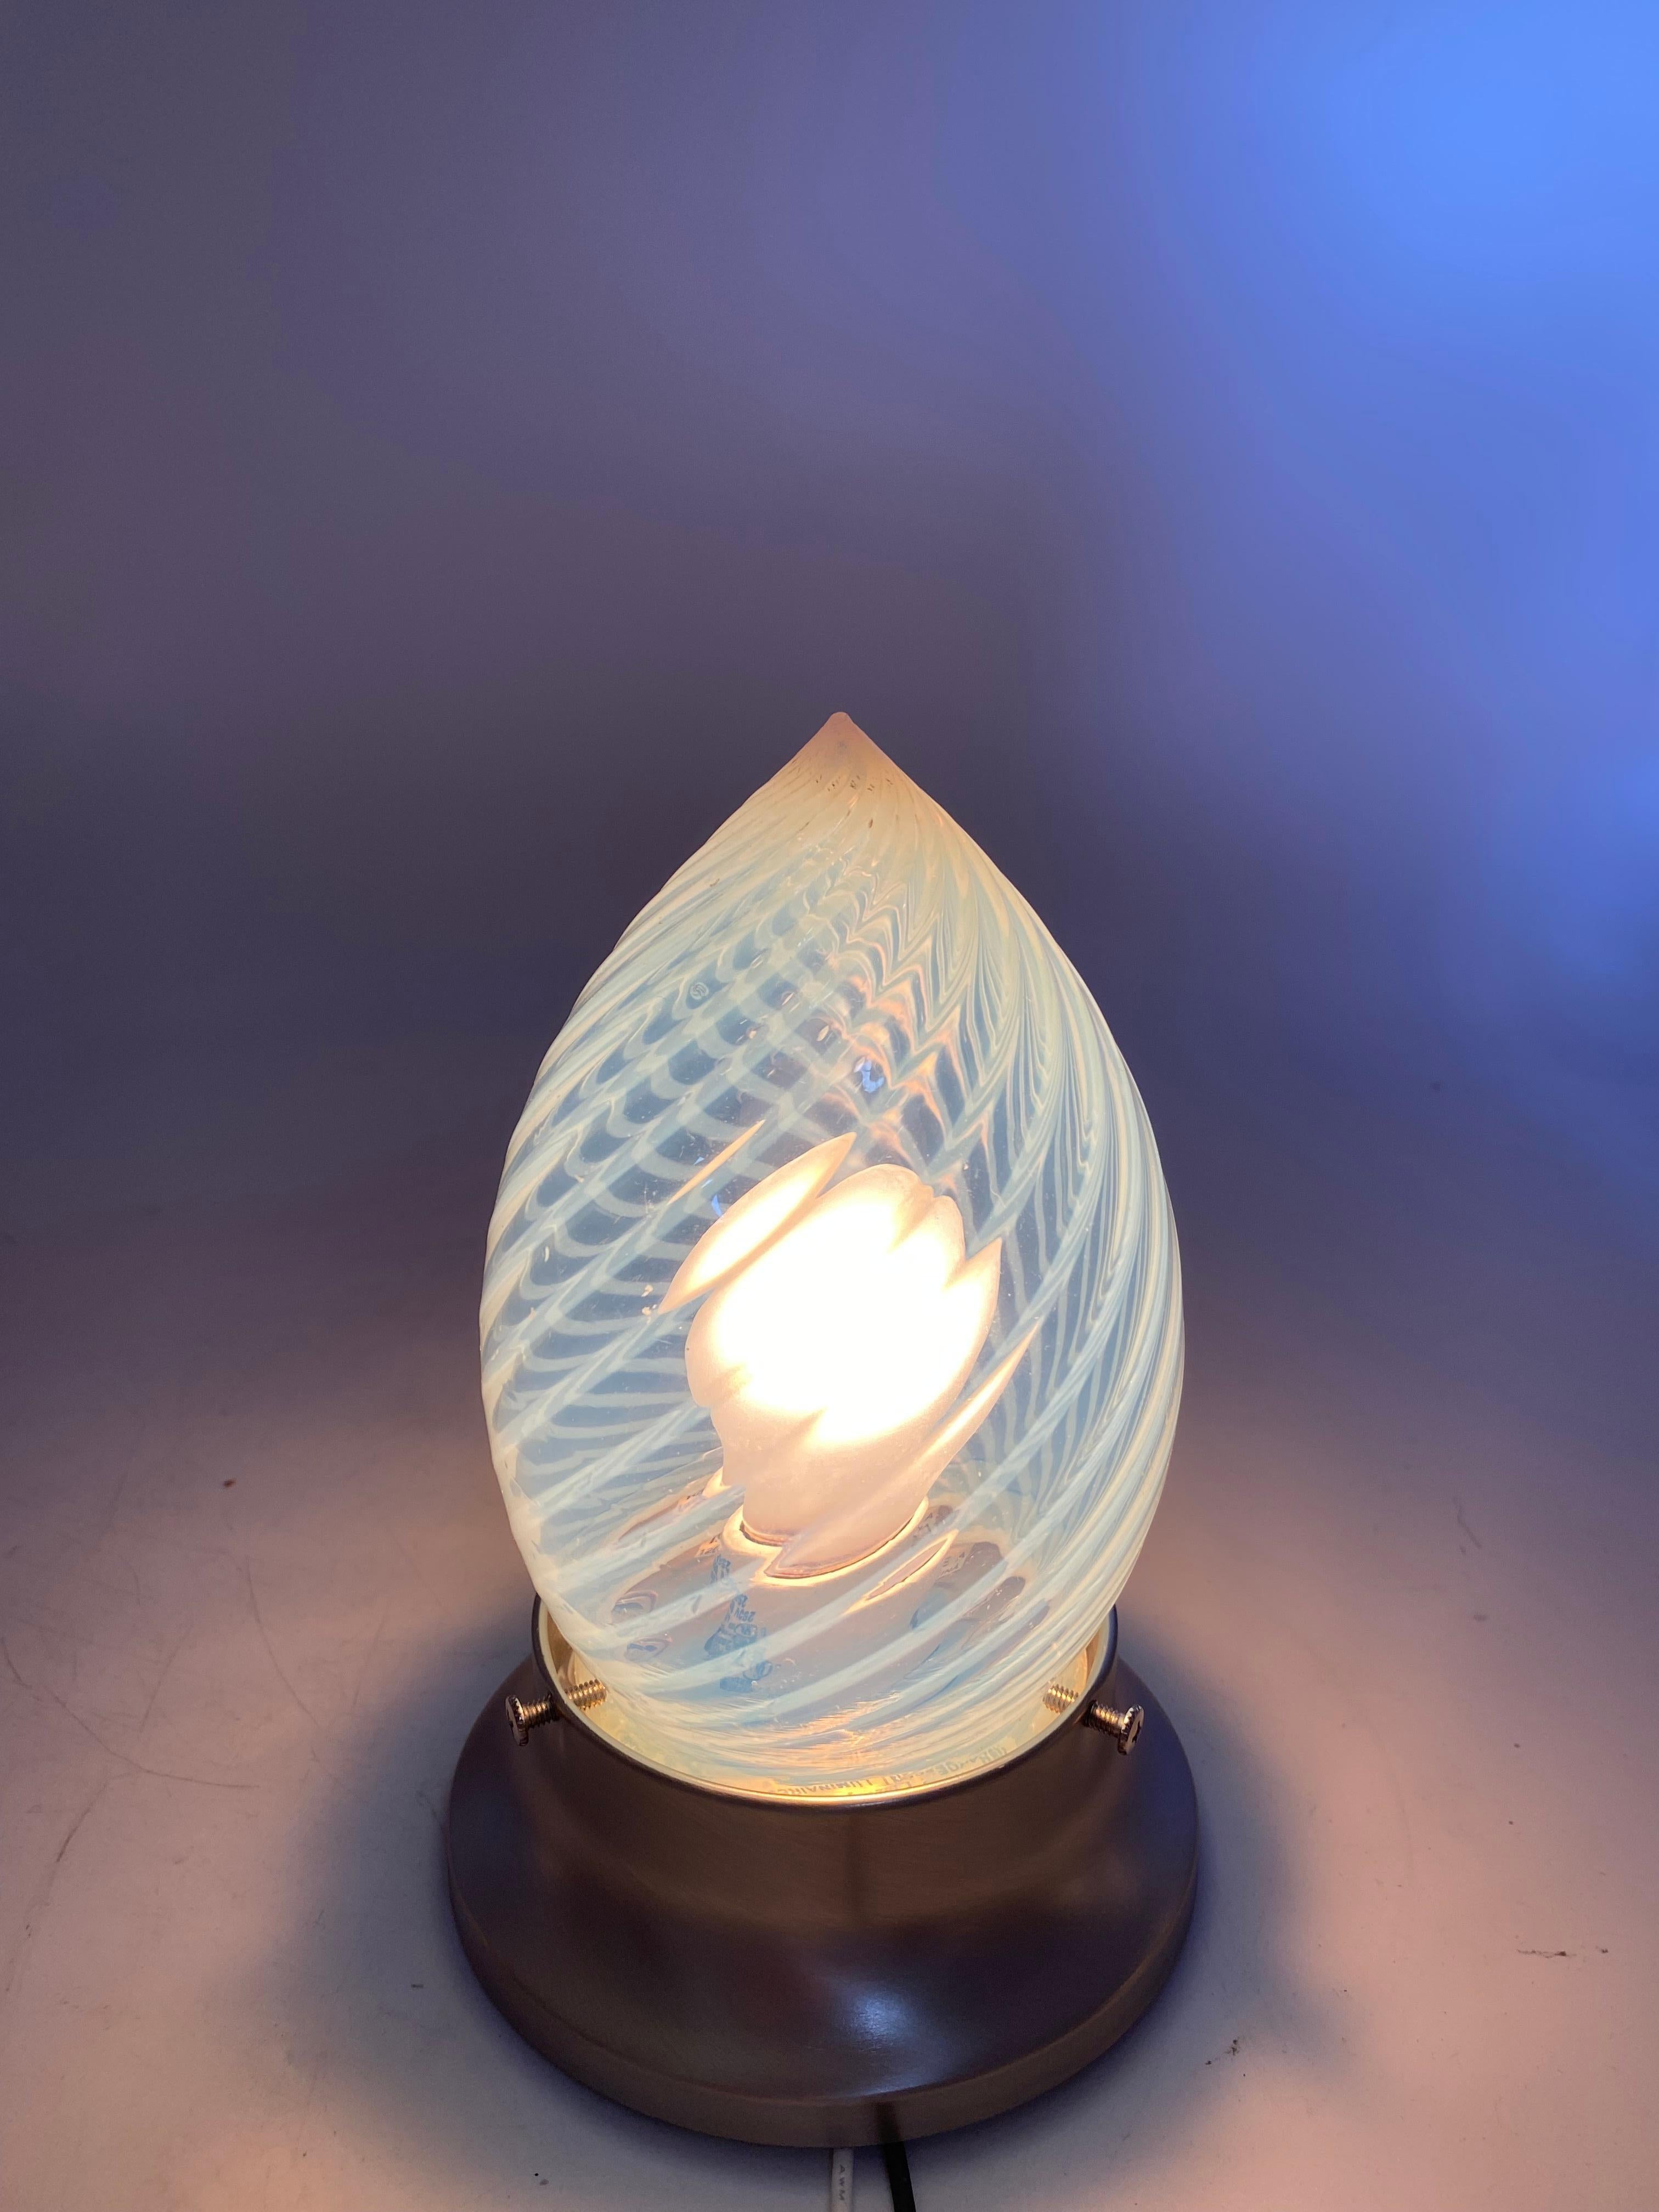 Vintage Art Deco vaseline opalescent teardrop swirl glass bullet shade. Heavy glass with a translucent green hue with masterfully perfectly done hand-blown swirls, circa 1960s possible made in Italy or USA in the 1960s this is a wonderful addition